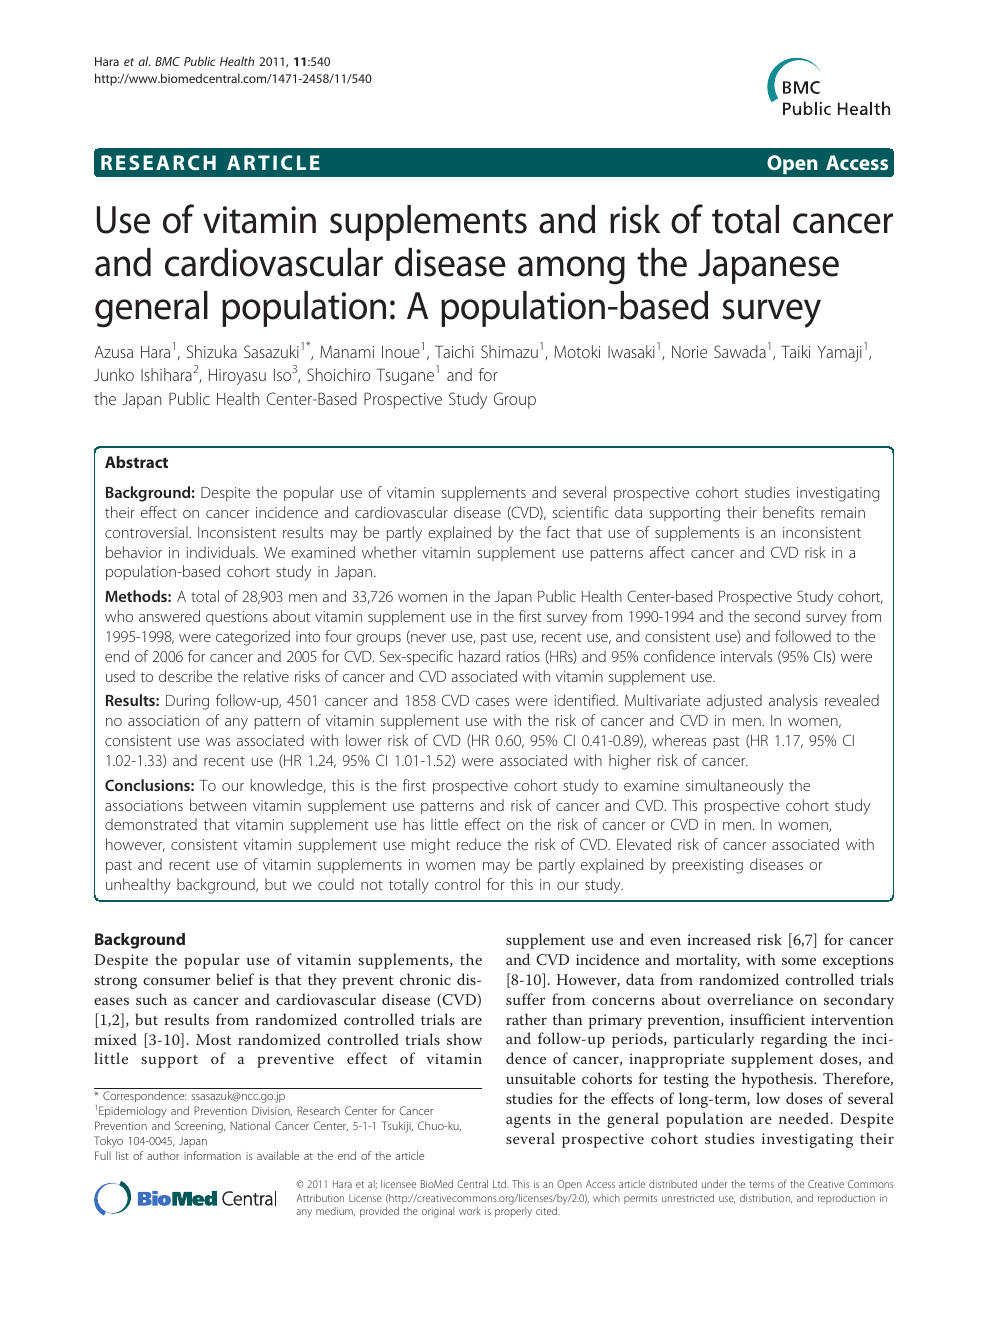 Use of vitamin supplements and risk of total cancer and cardiovascular disease among the Japanese general population A population-based survey image